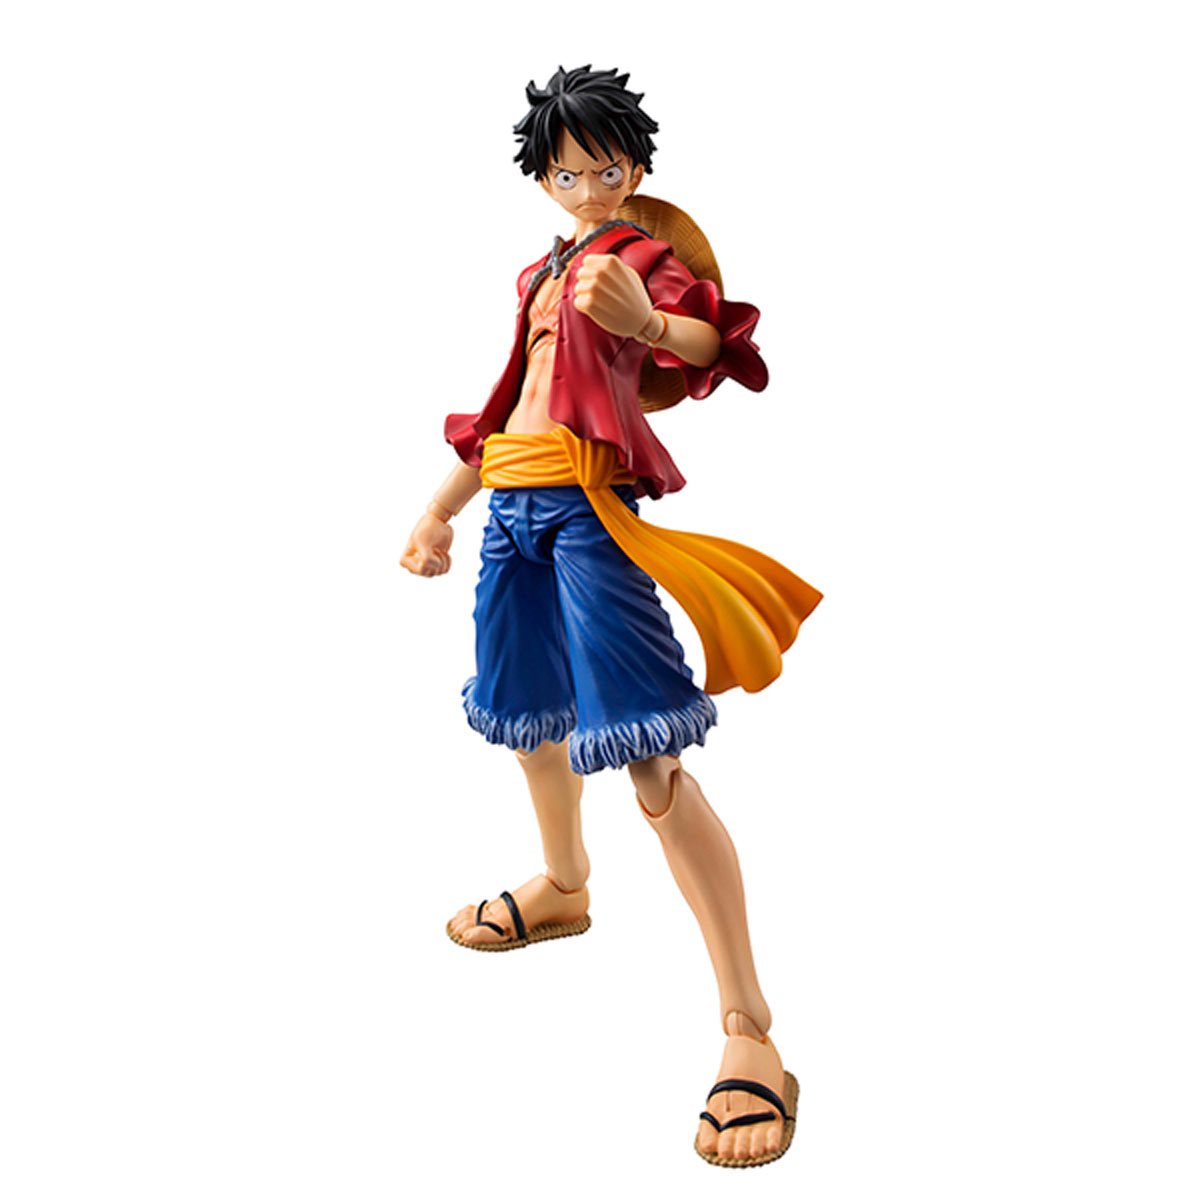 One Piece 6 Inch Action Figure Anime Heroes - Monkey D. Luffy Renewal